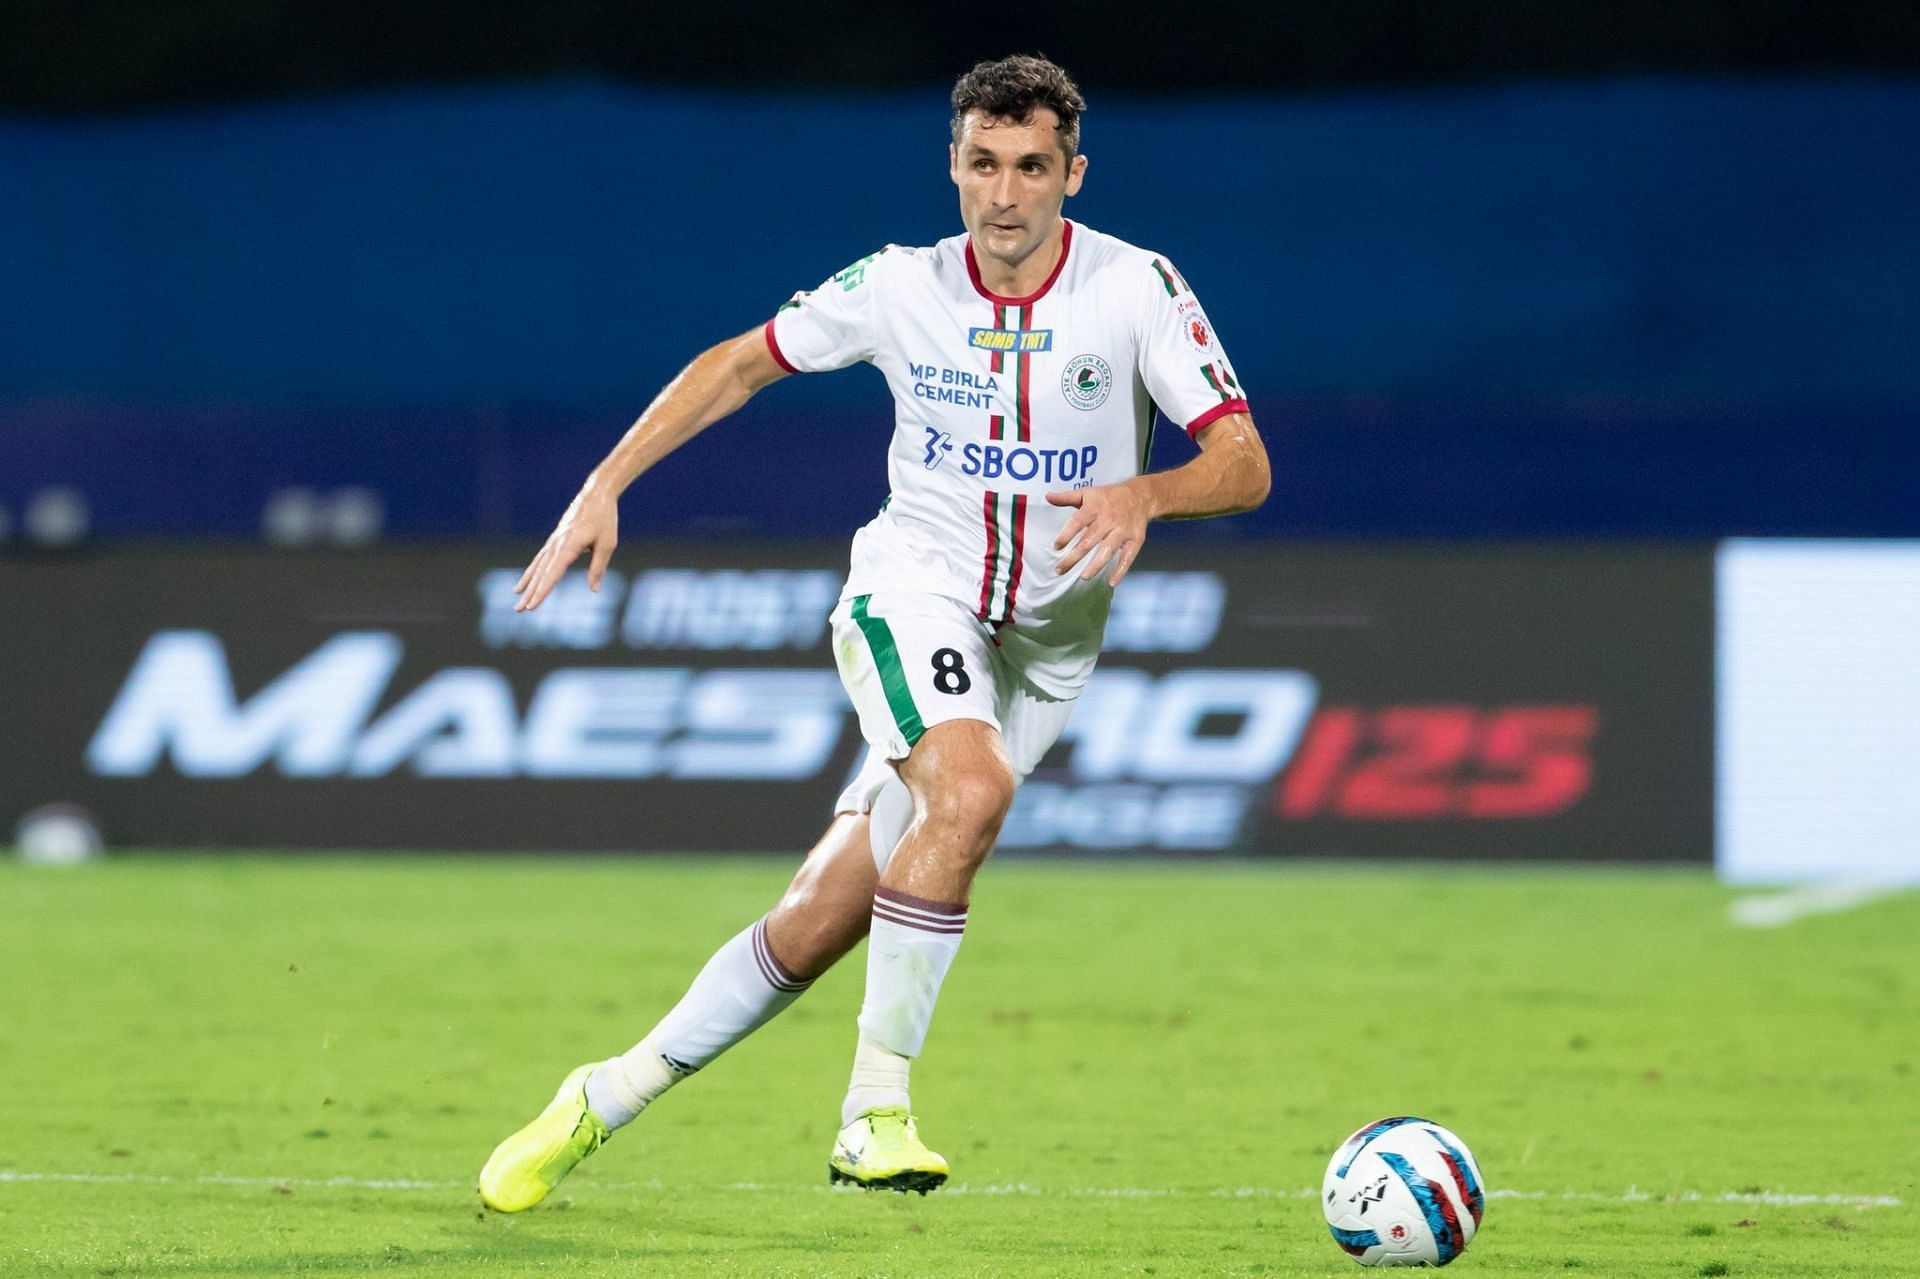 Carl McHugh has been a pivotal figure in the Mohun Bagan SG midfield. (Image Courtesy: ISL Media)